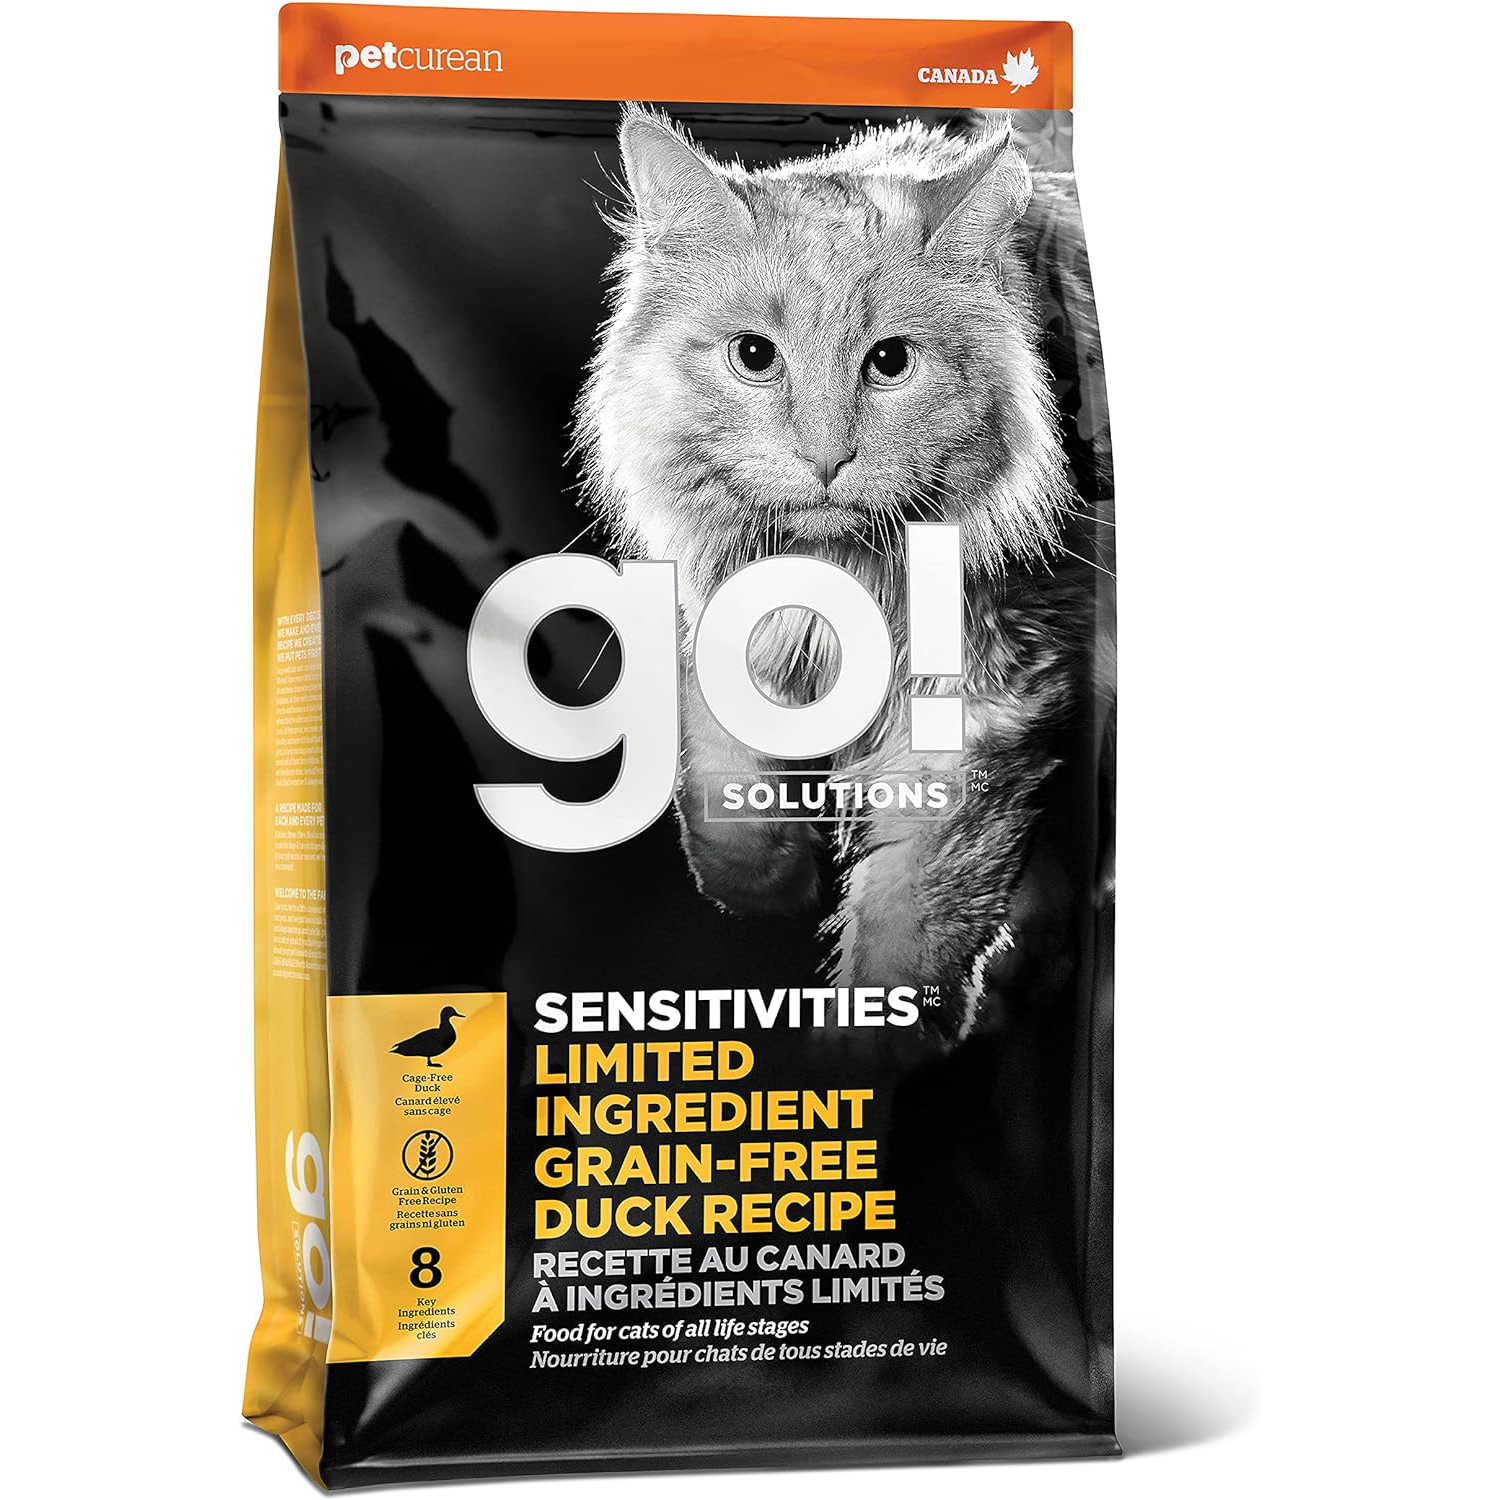 GO! SOLUTIONS Sensitivities – Duck Recipe – Limited Ingredient Dry Cat Food, 8 lb – Grain Free Cat Food for All Life Stages – to Support Sensitive Stomachs New